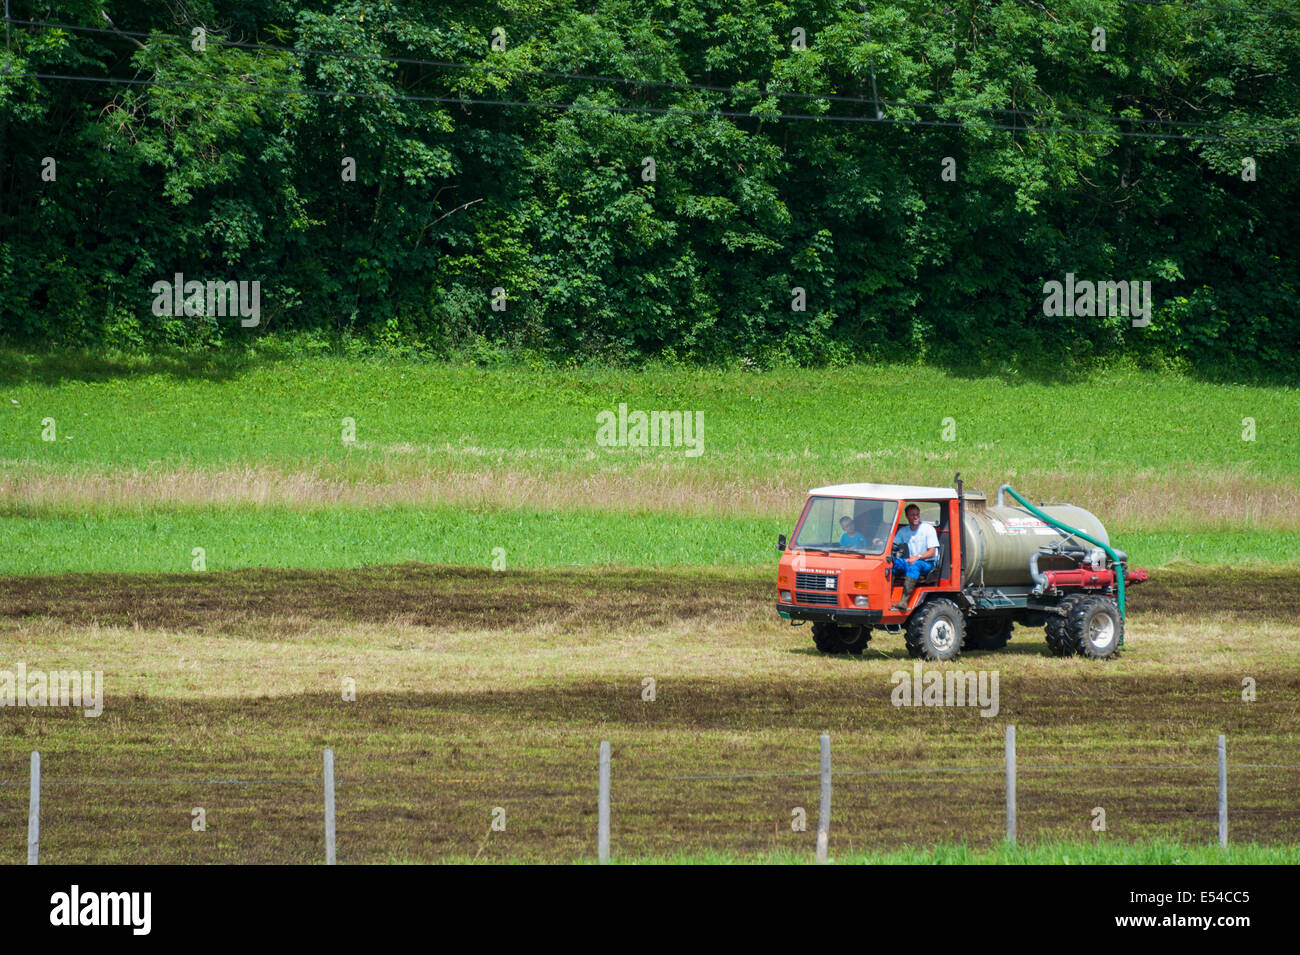 A Swiss farmer spreading muck on his hayfield. Stock Photo